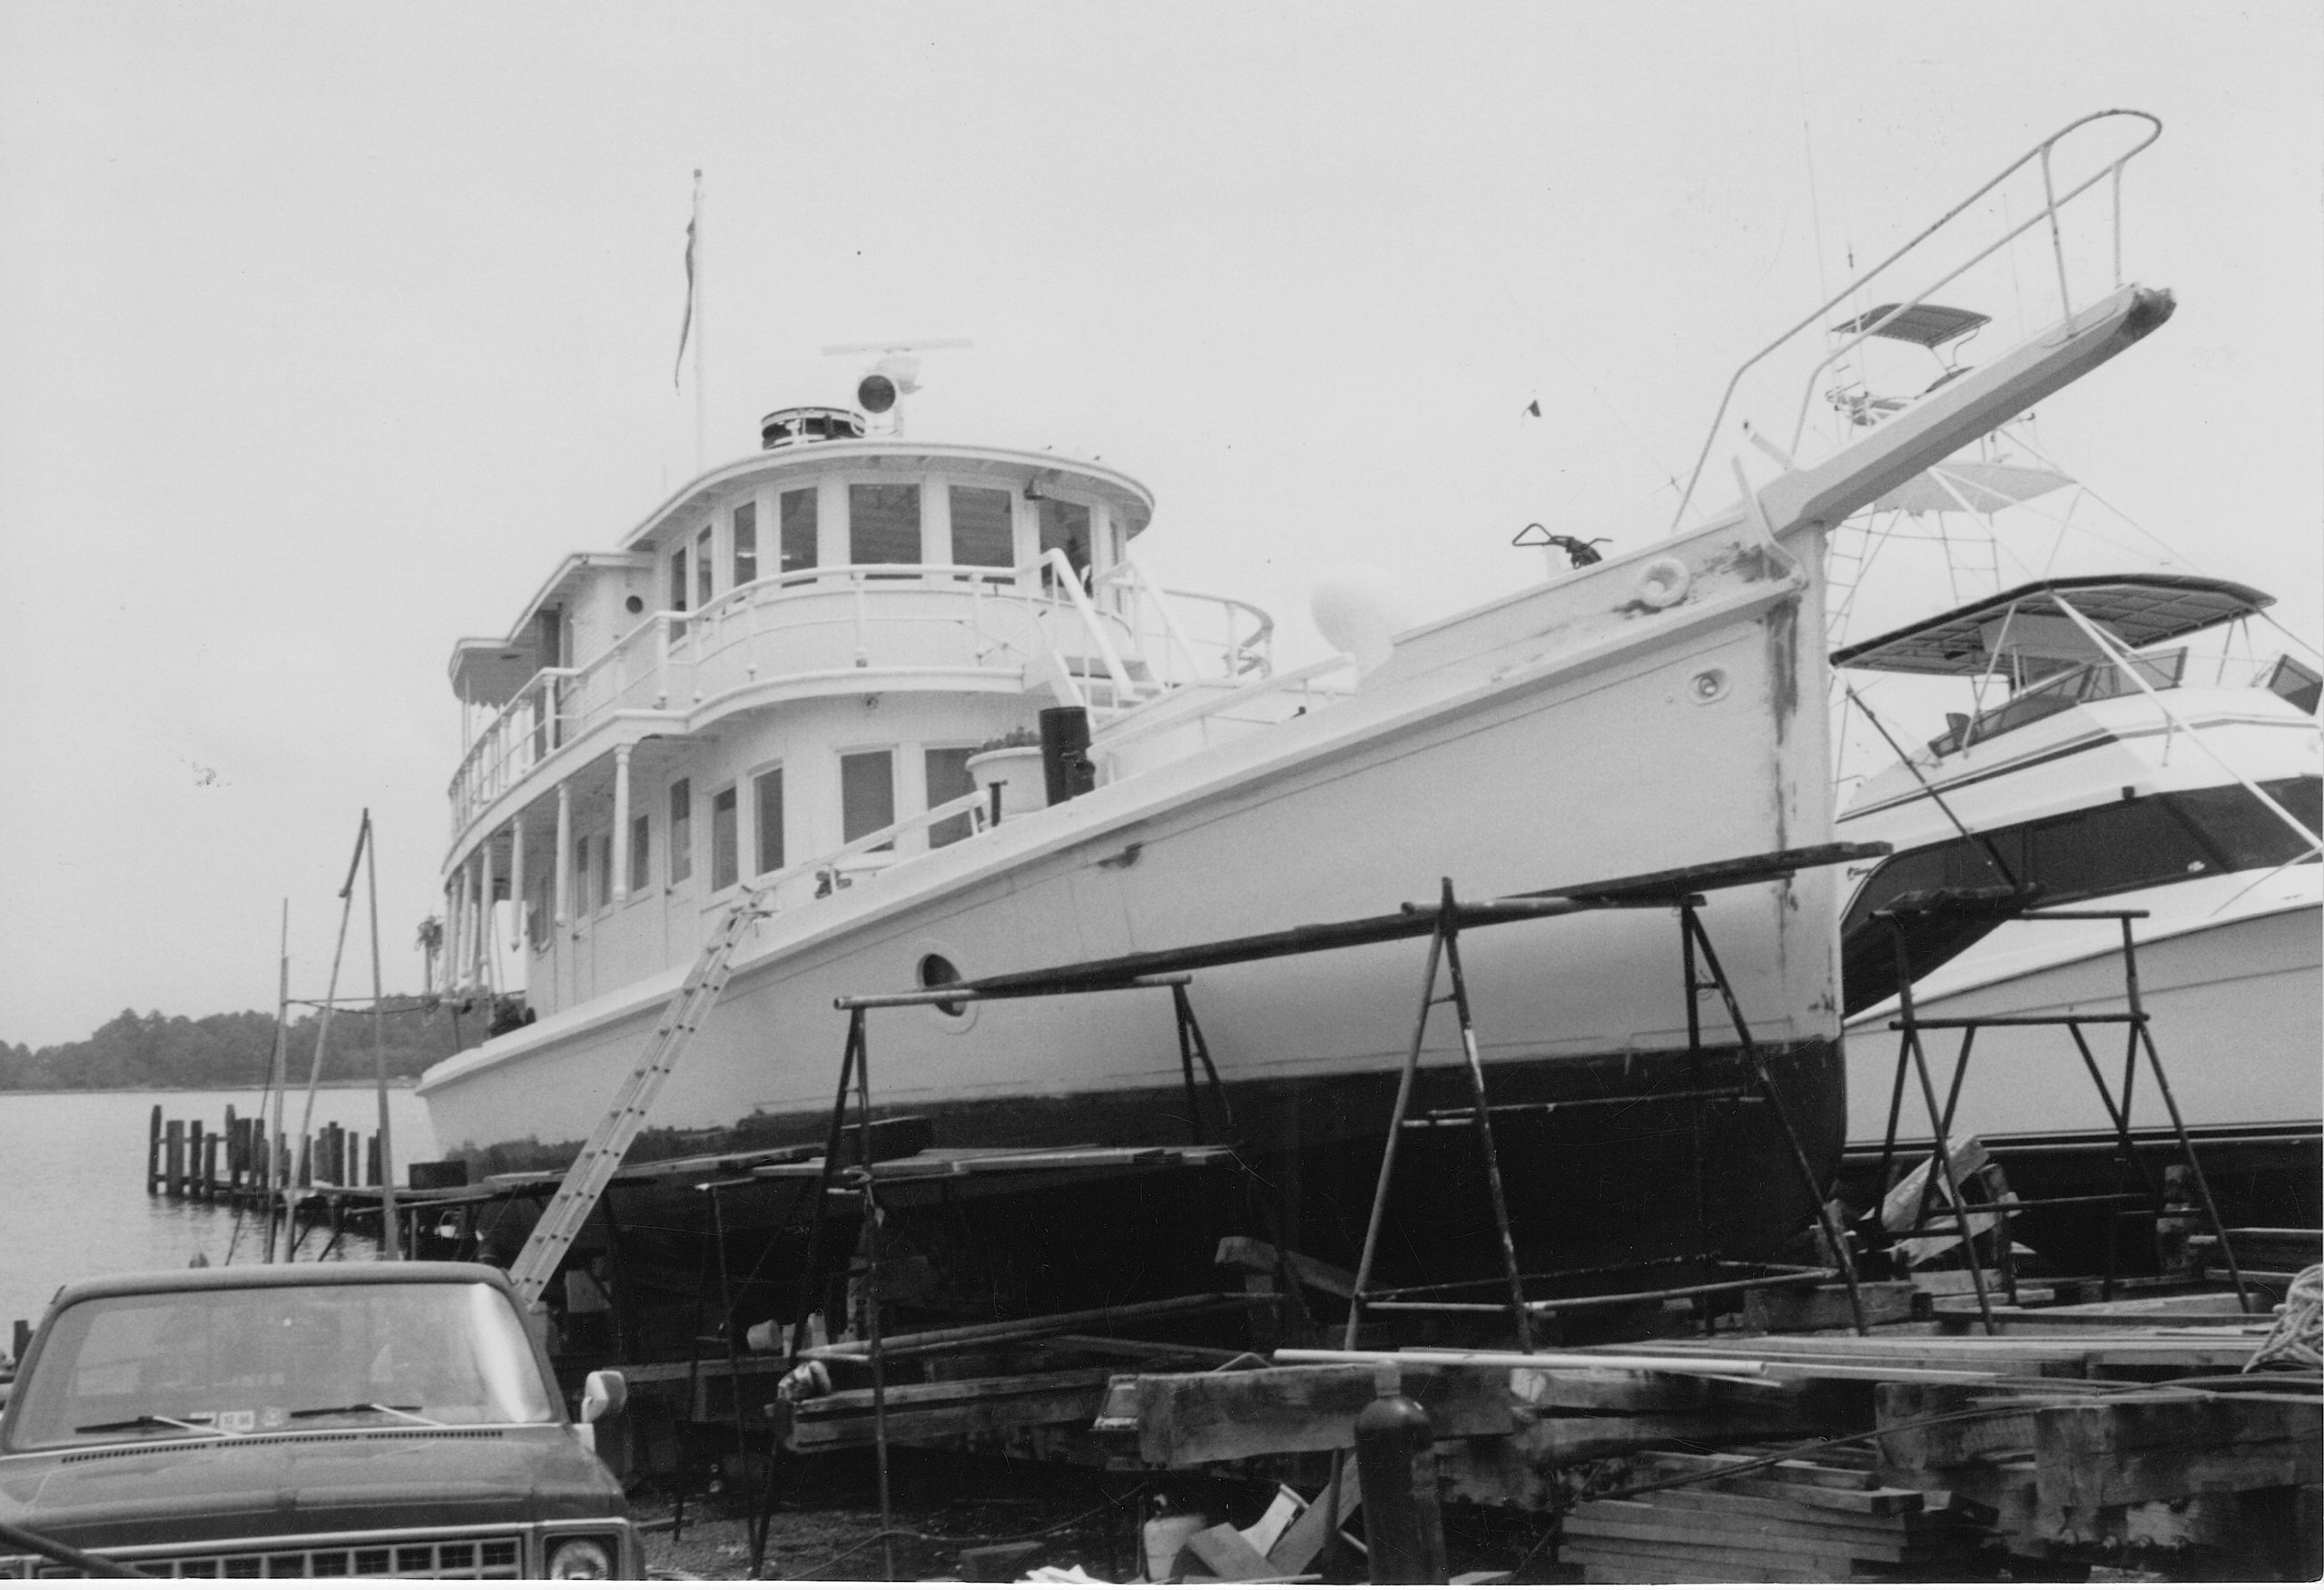 Md. Buyboat-Turned-Yacht Featured in New Documentary